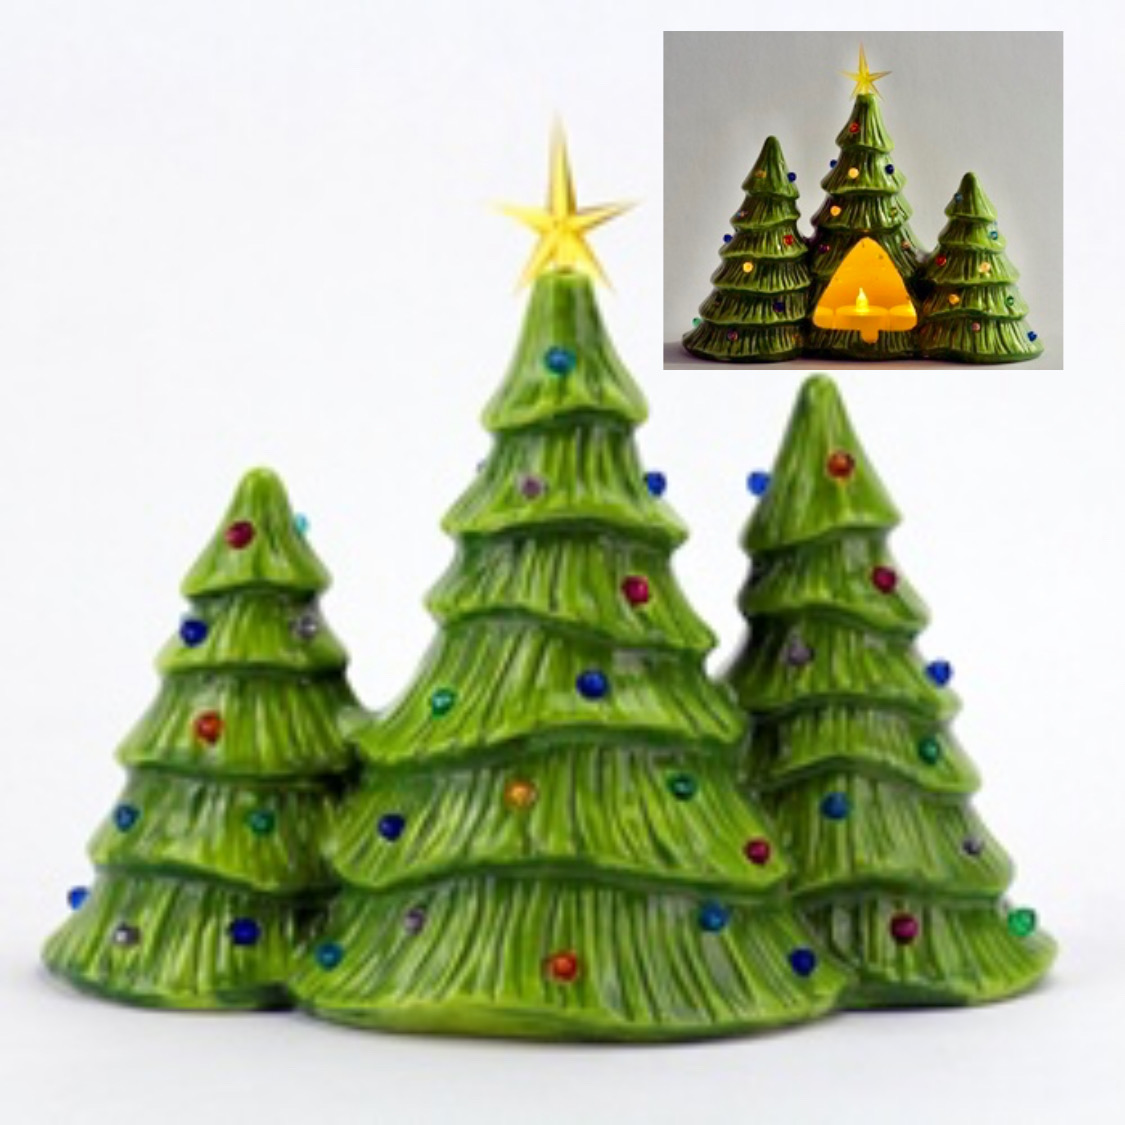 A Christmas Triple Tree Lantern experience project by Yaymaker